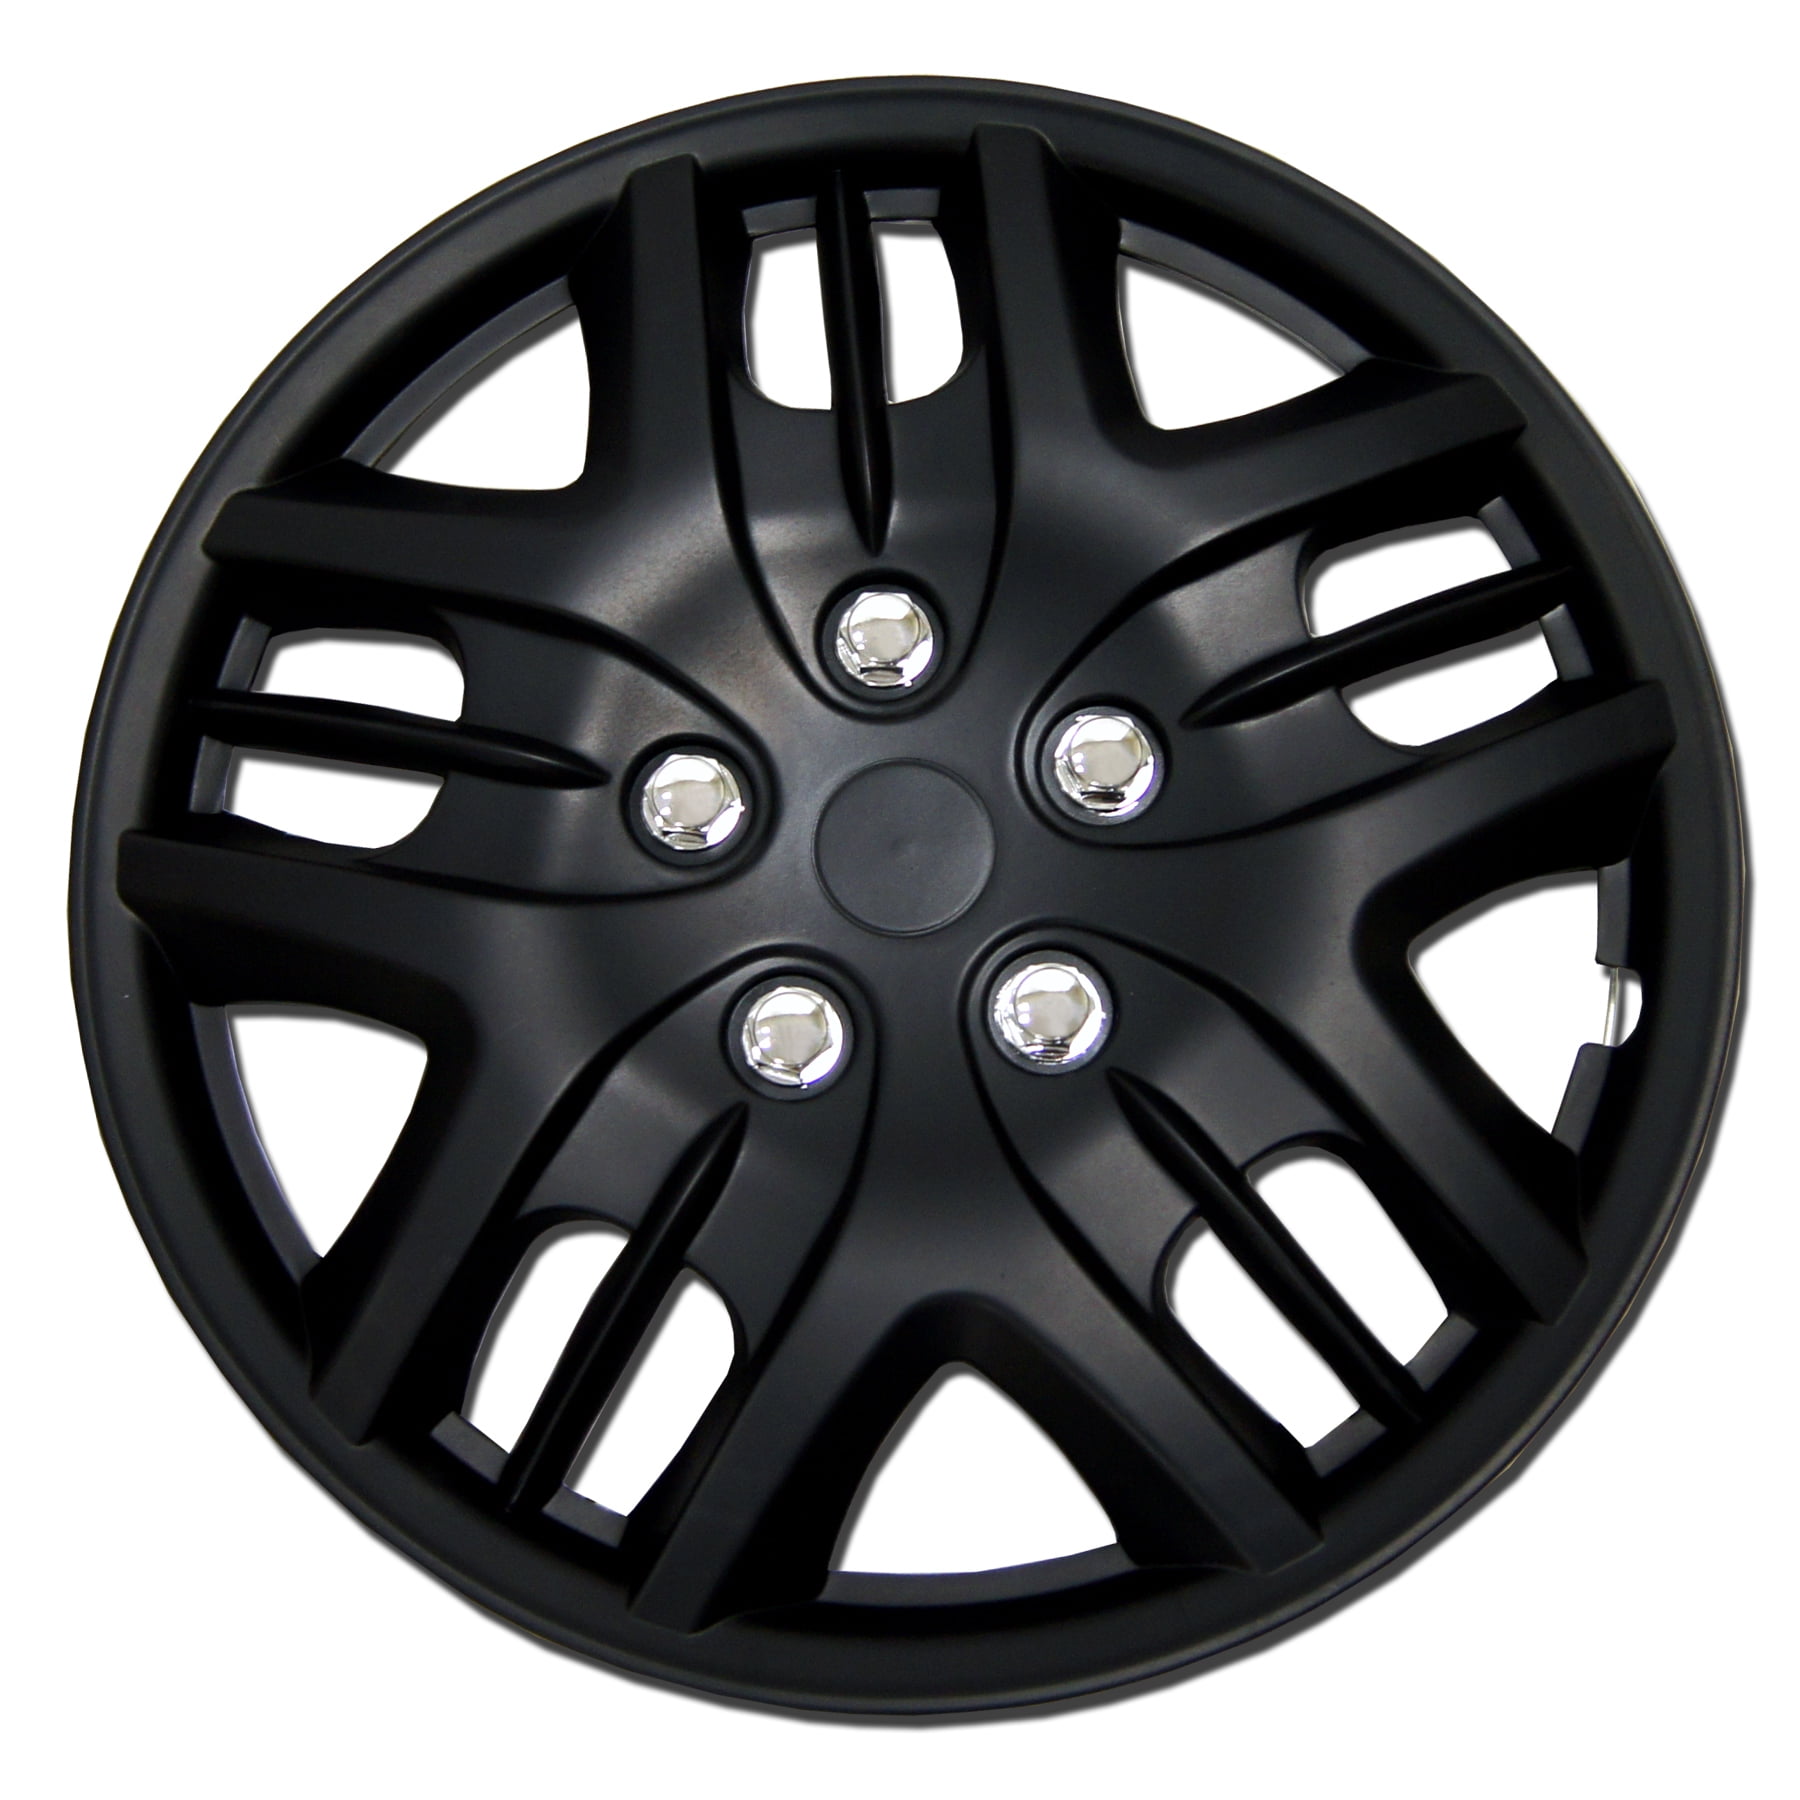 Tuningpros WC3-15-3523-B 15-Inches Style Snap-On Type Matte Black Wheel Covers Hub-caps Pack of 4 Hubcaps Pop-On 